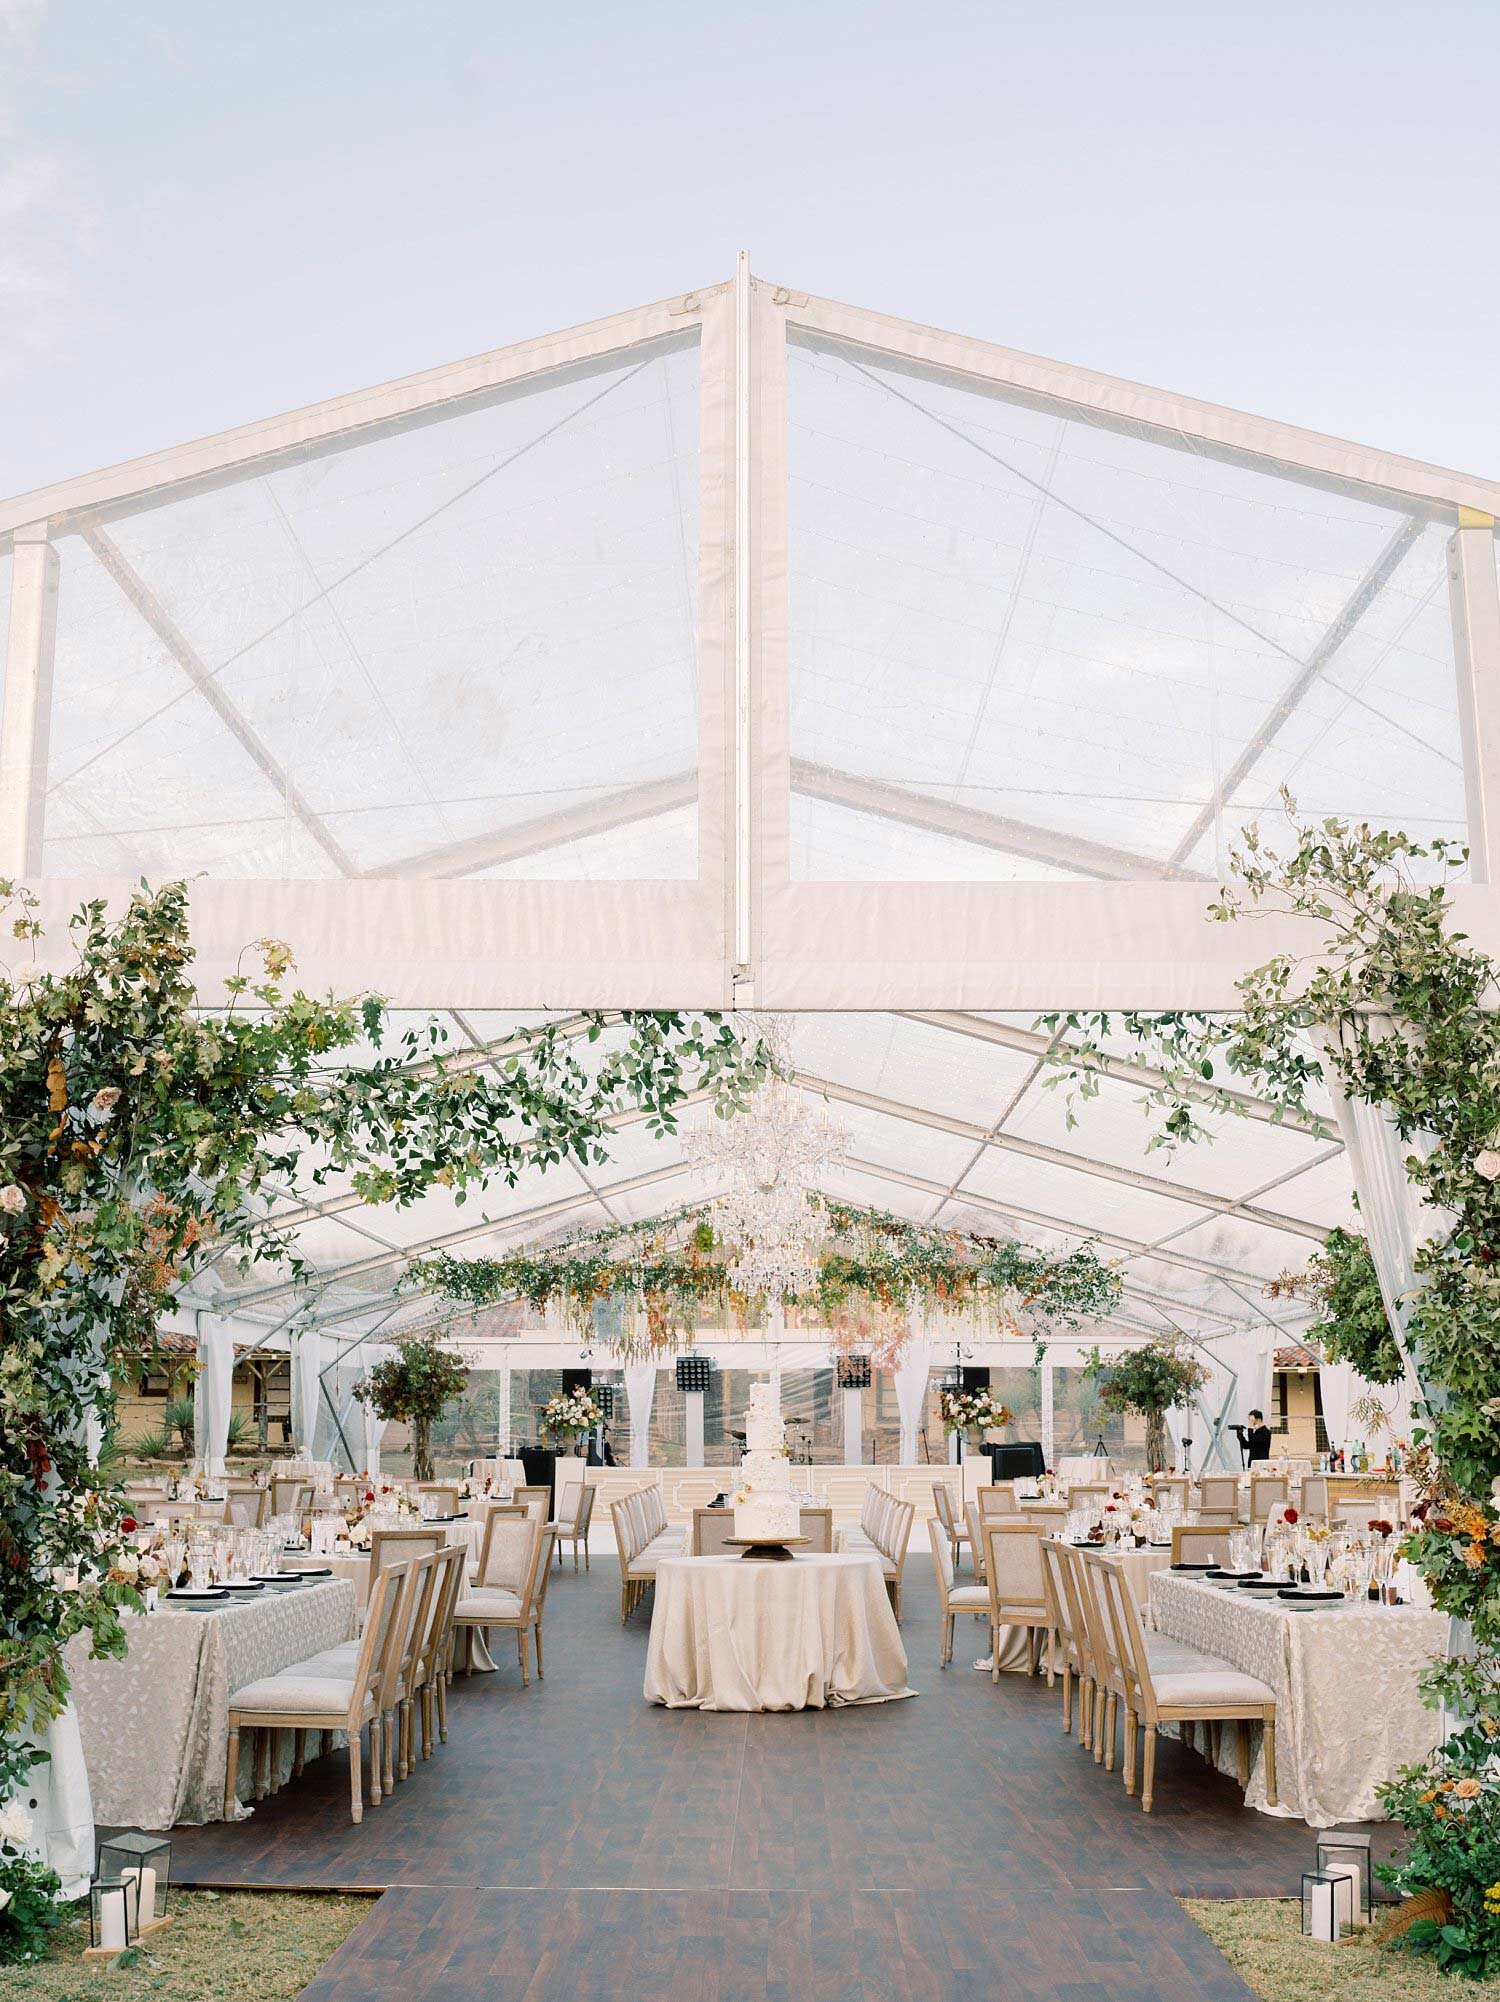 Texas destination wedding with a Clear tented reception